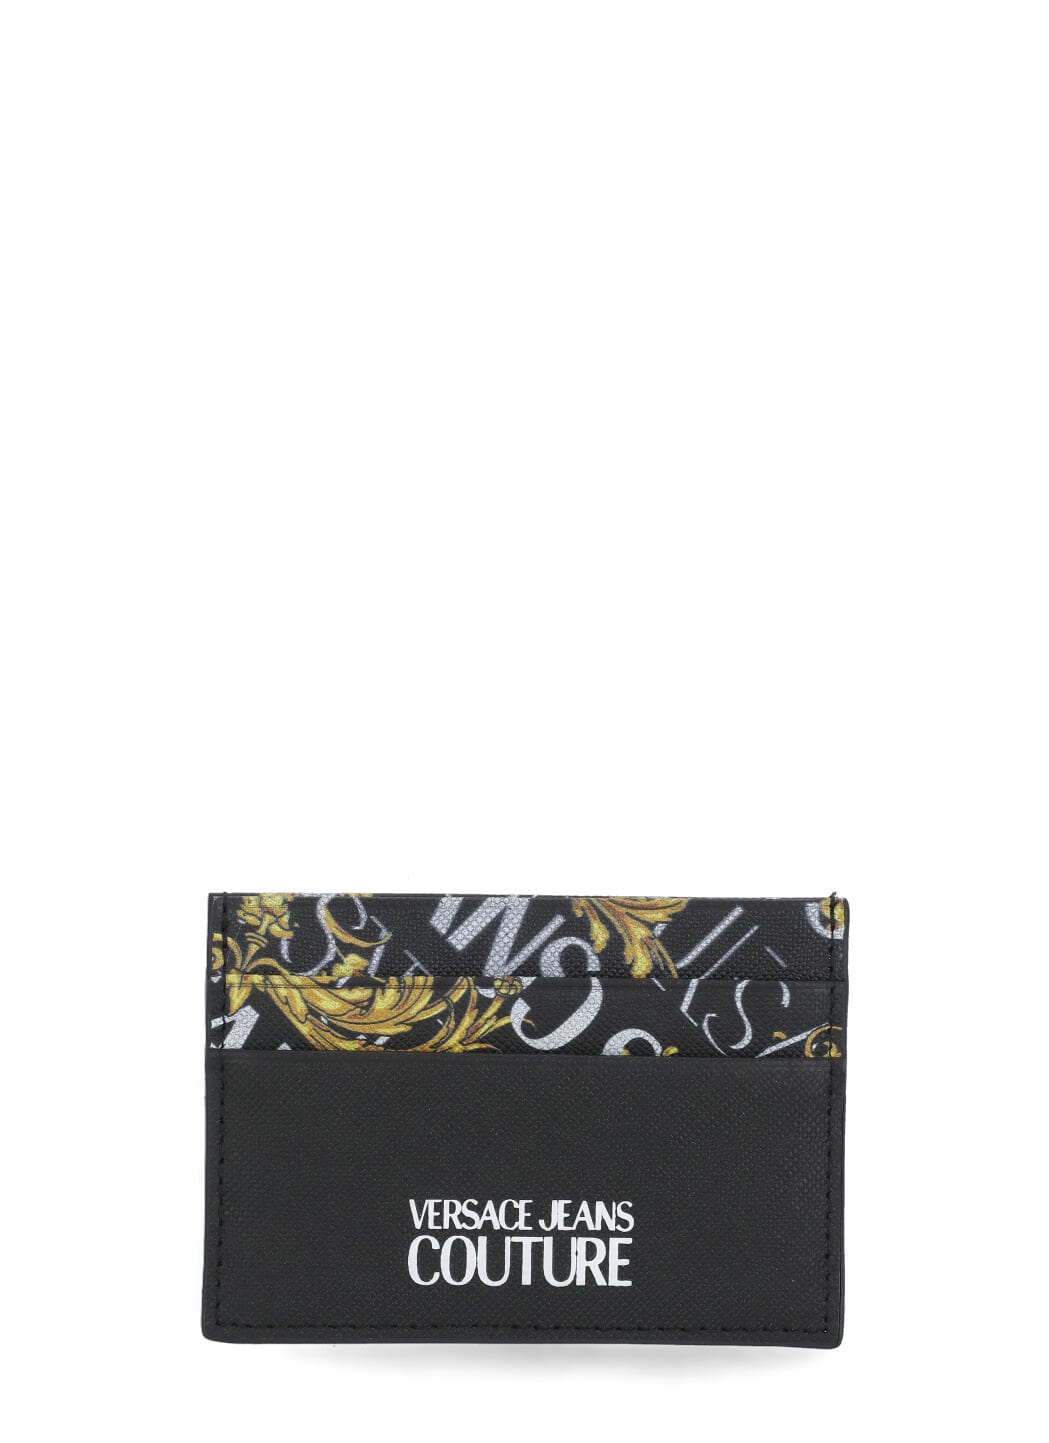 Versace Jeans Couture Brush Leather Cardholder